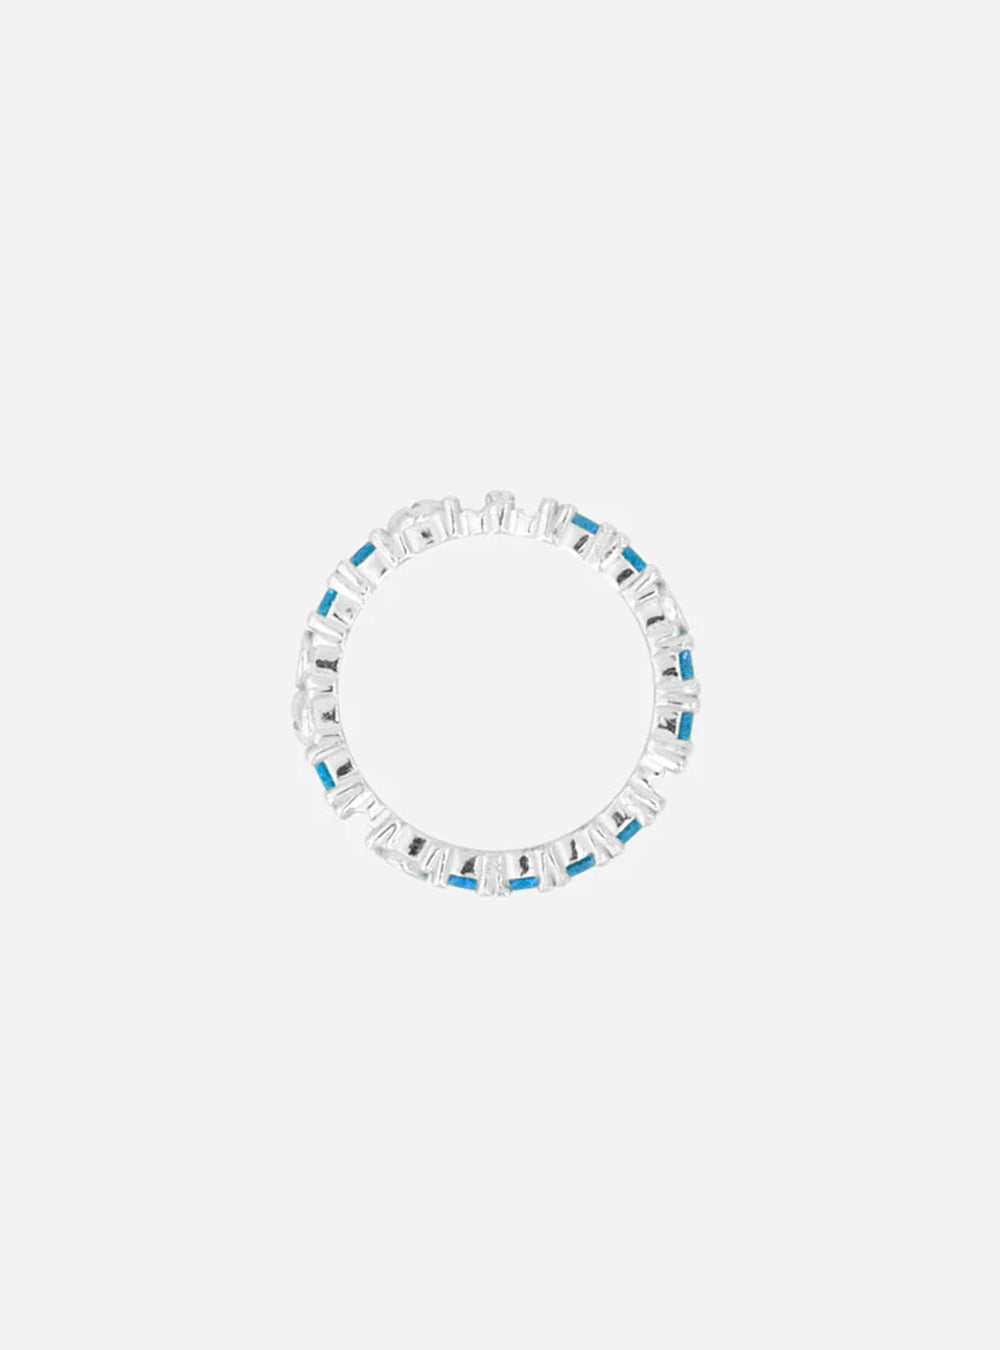 a MIDNIGHTFACTORY white gold bracelet with blue stones.